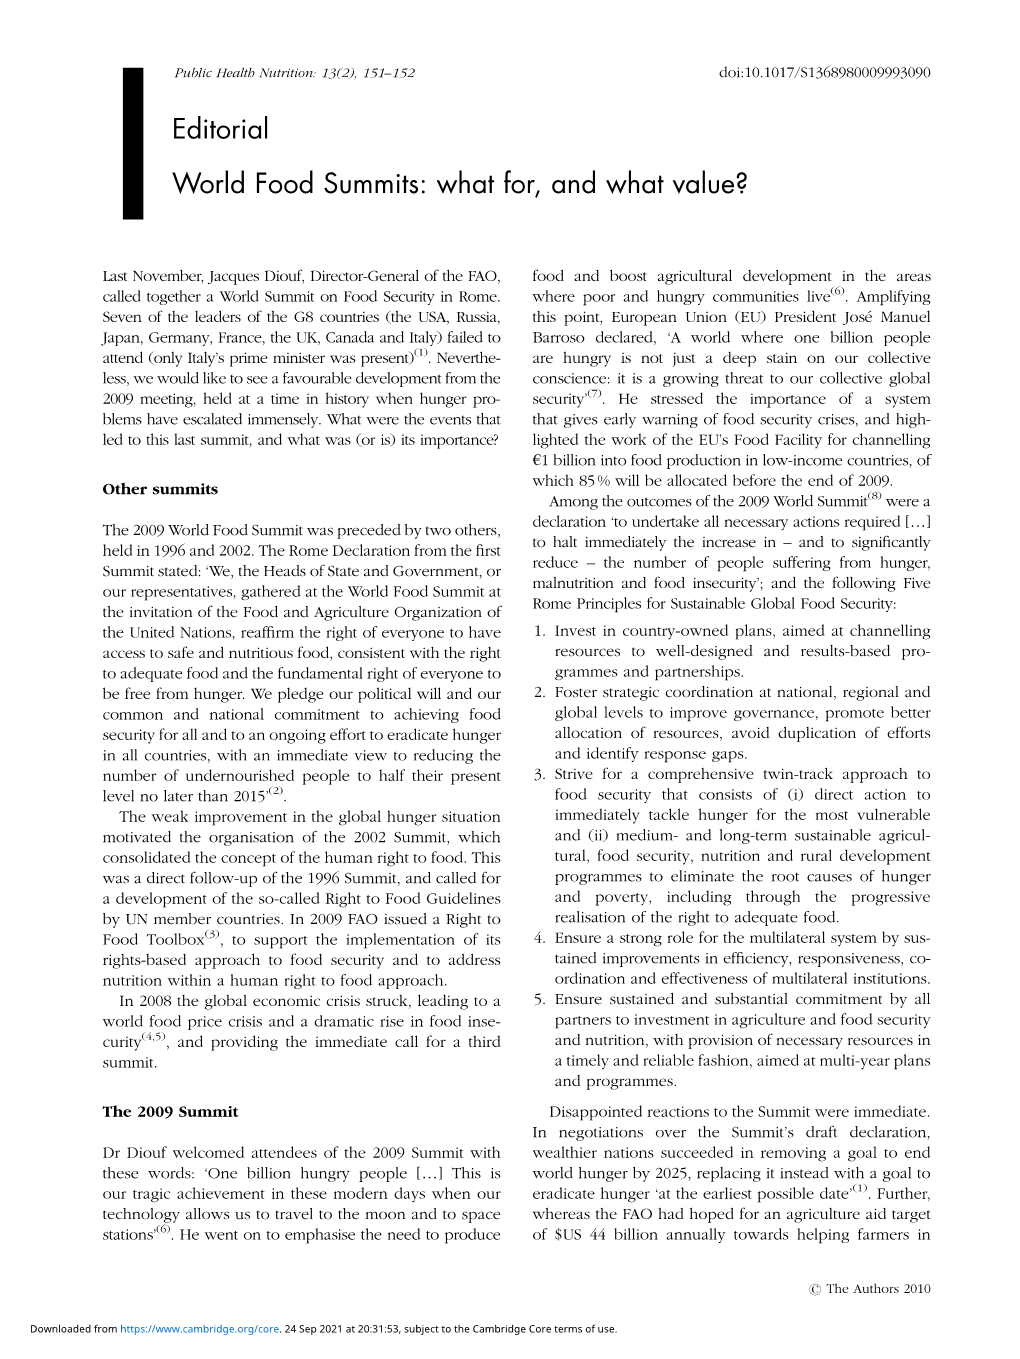 World Food Summits: What For, and What Value?